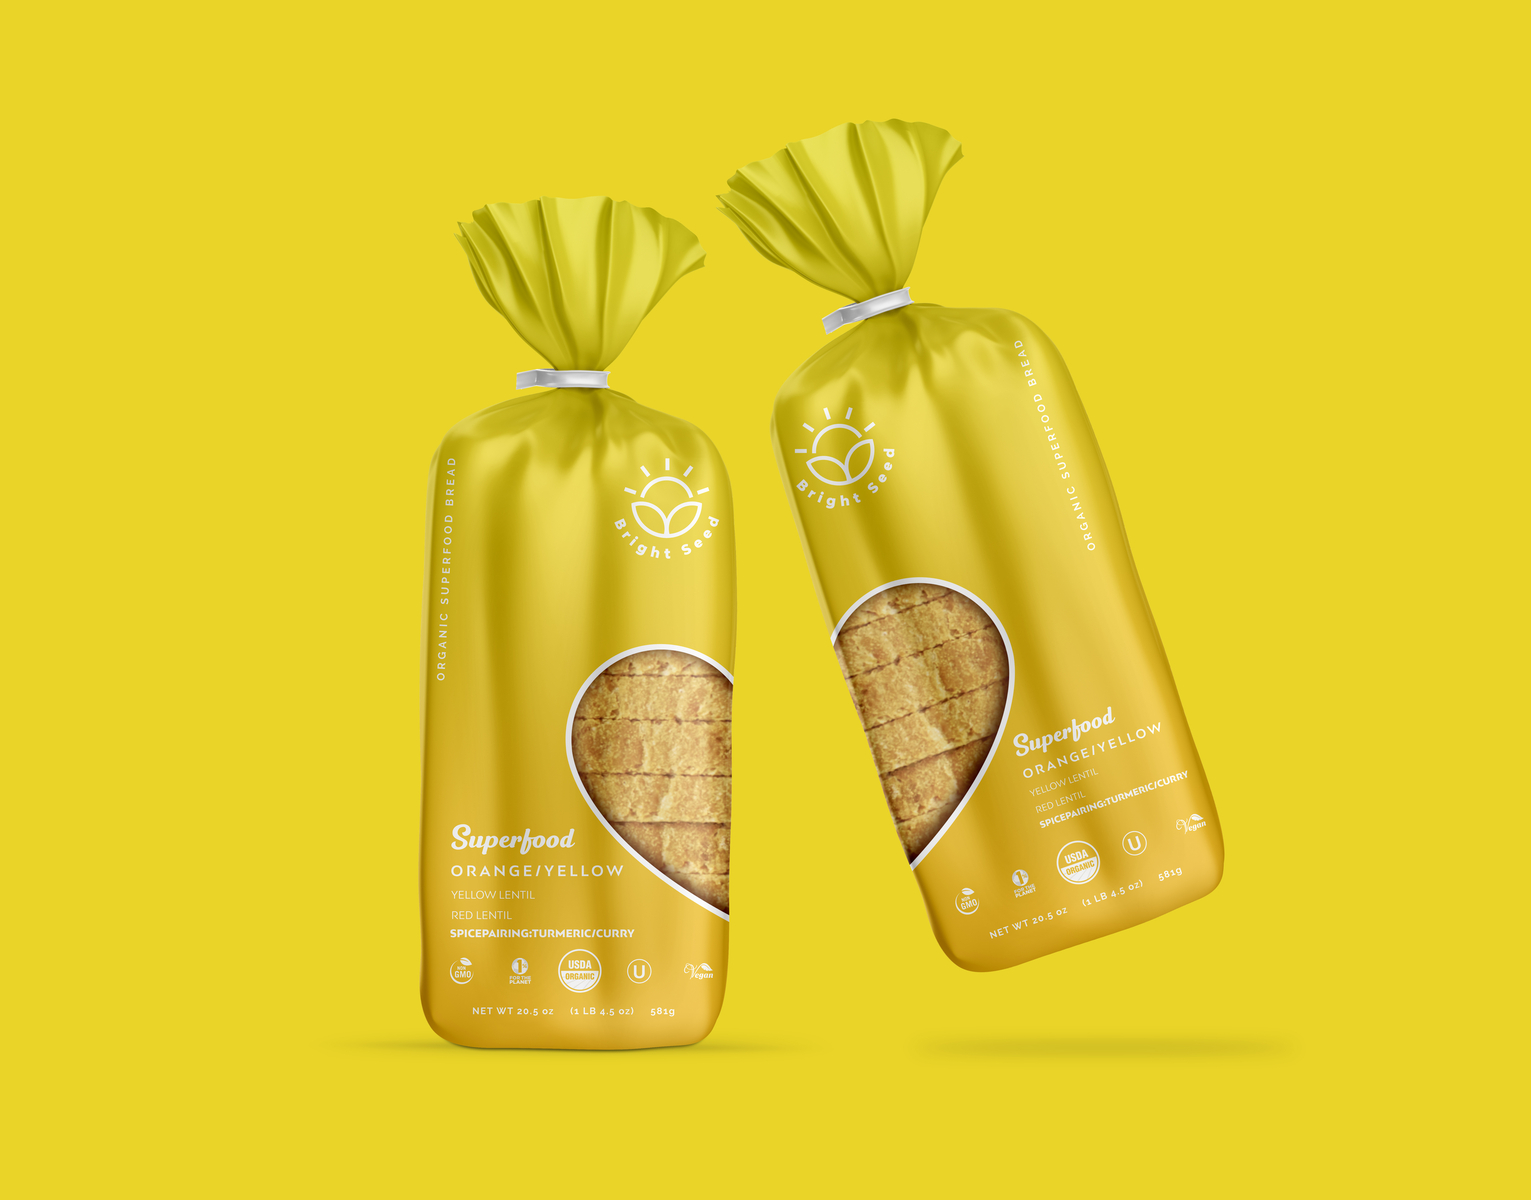 Download Yellow Bread Bag Packaging By Careth Vanessa For Disegna Team On Dribbble PSD Mockup Templates